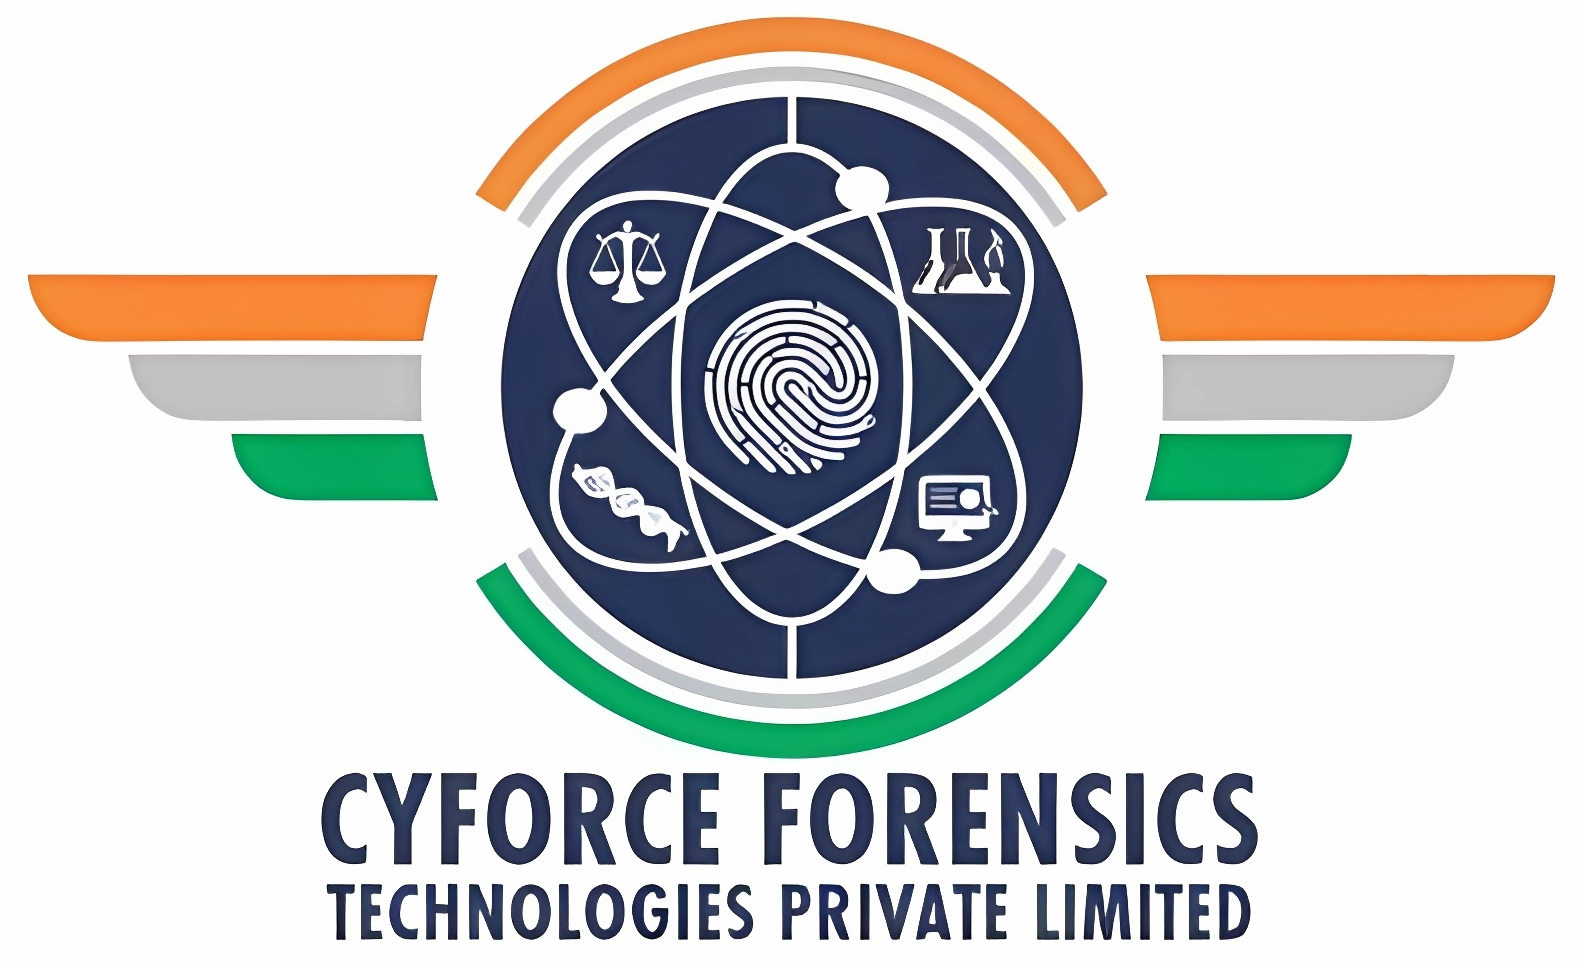 Cyforce Forensics Technologies Private Limited